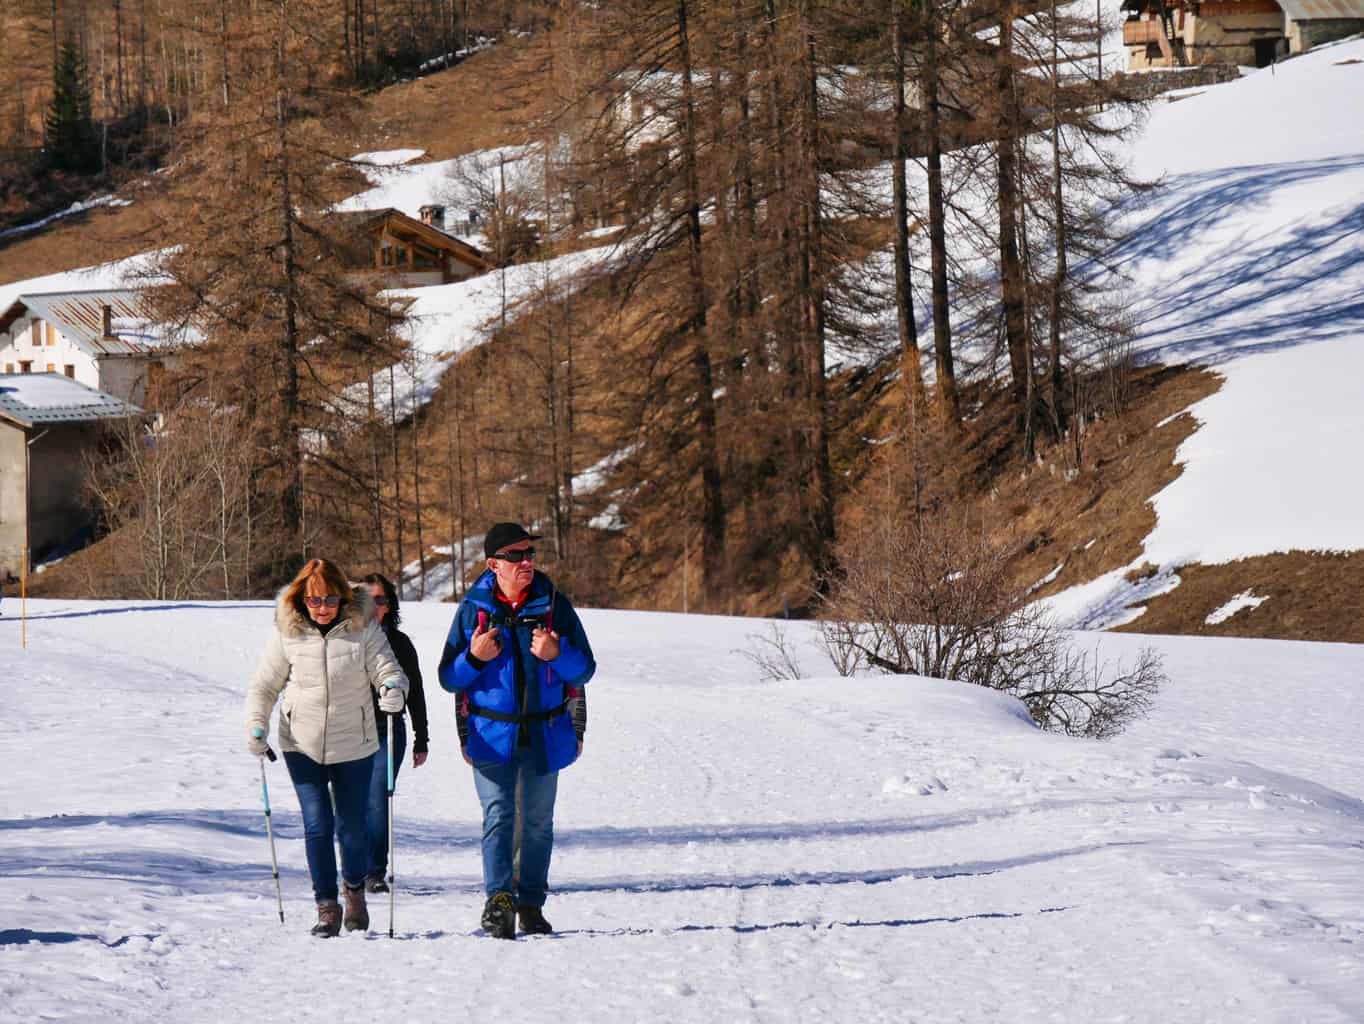 People walking in snow in valley between Les Arcs and La Plagne in the French Alps